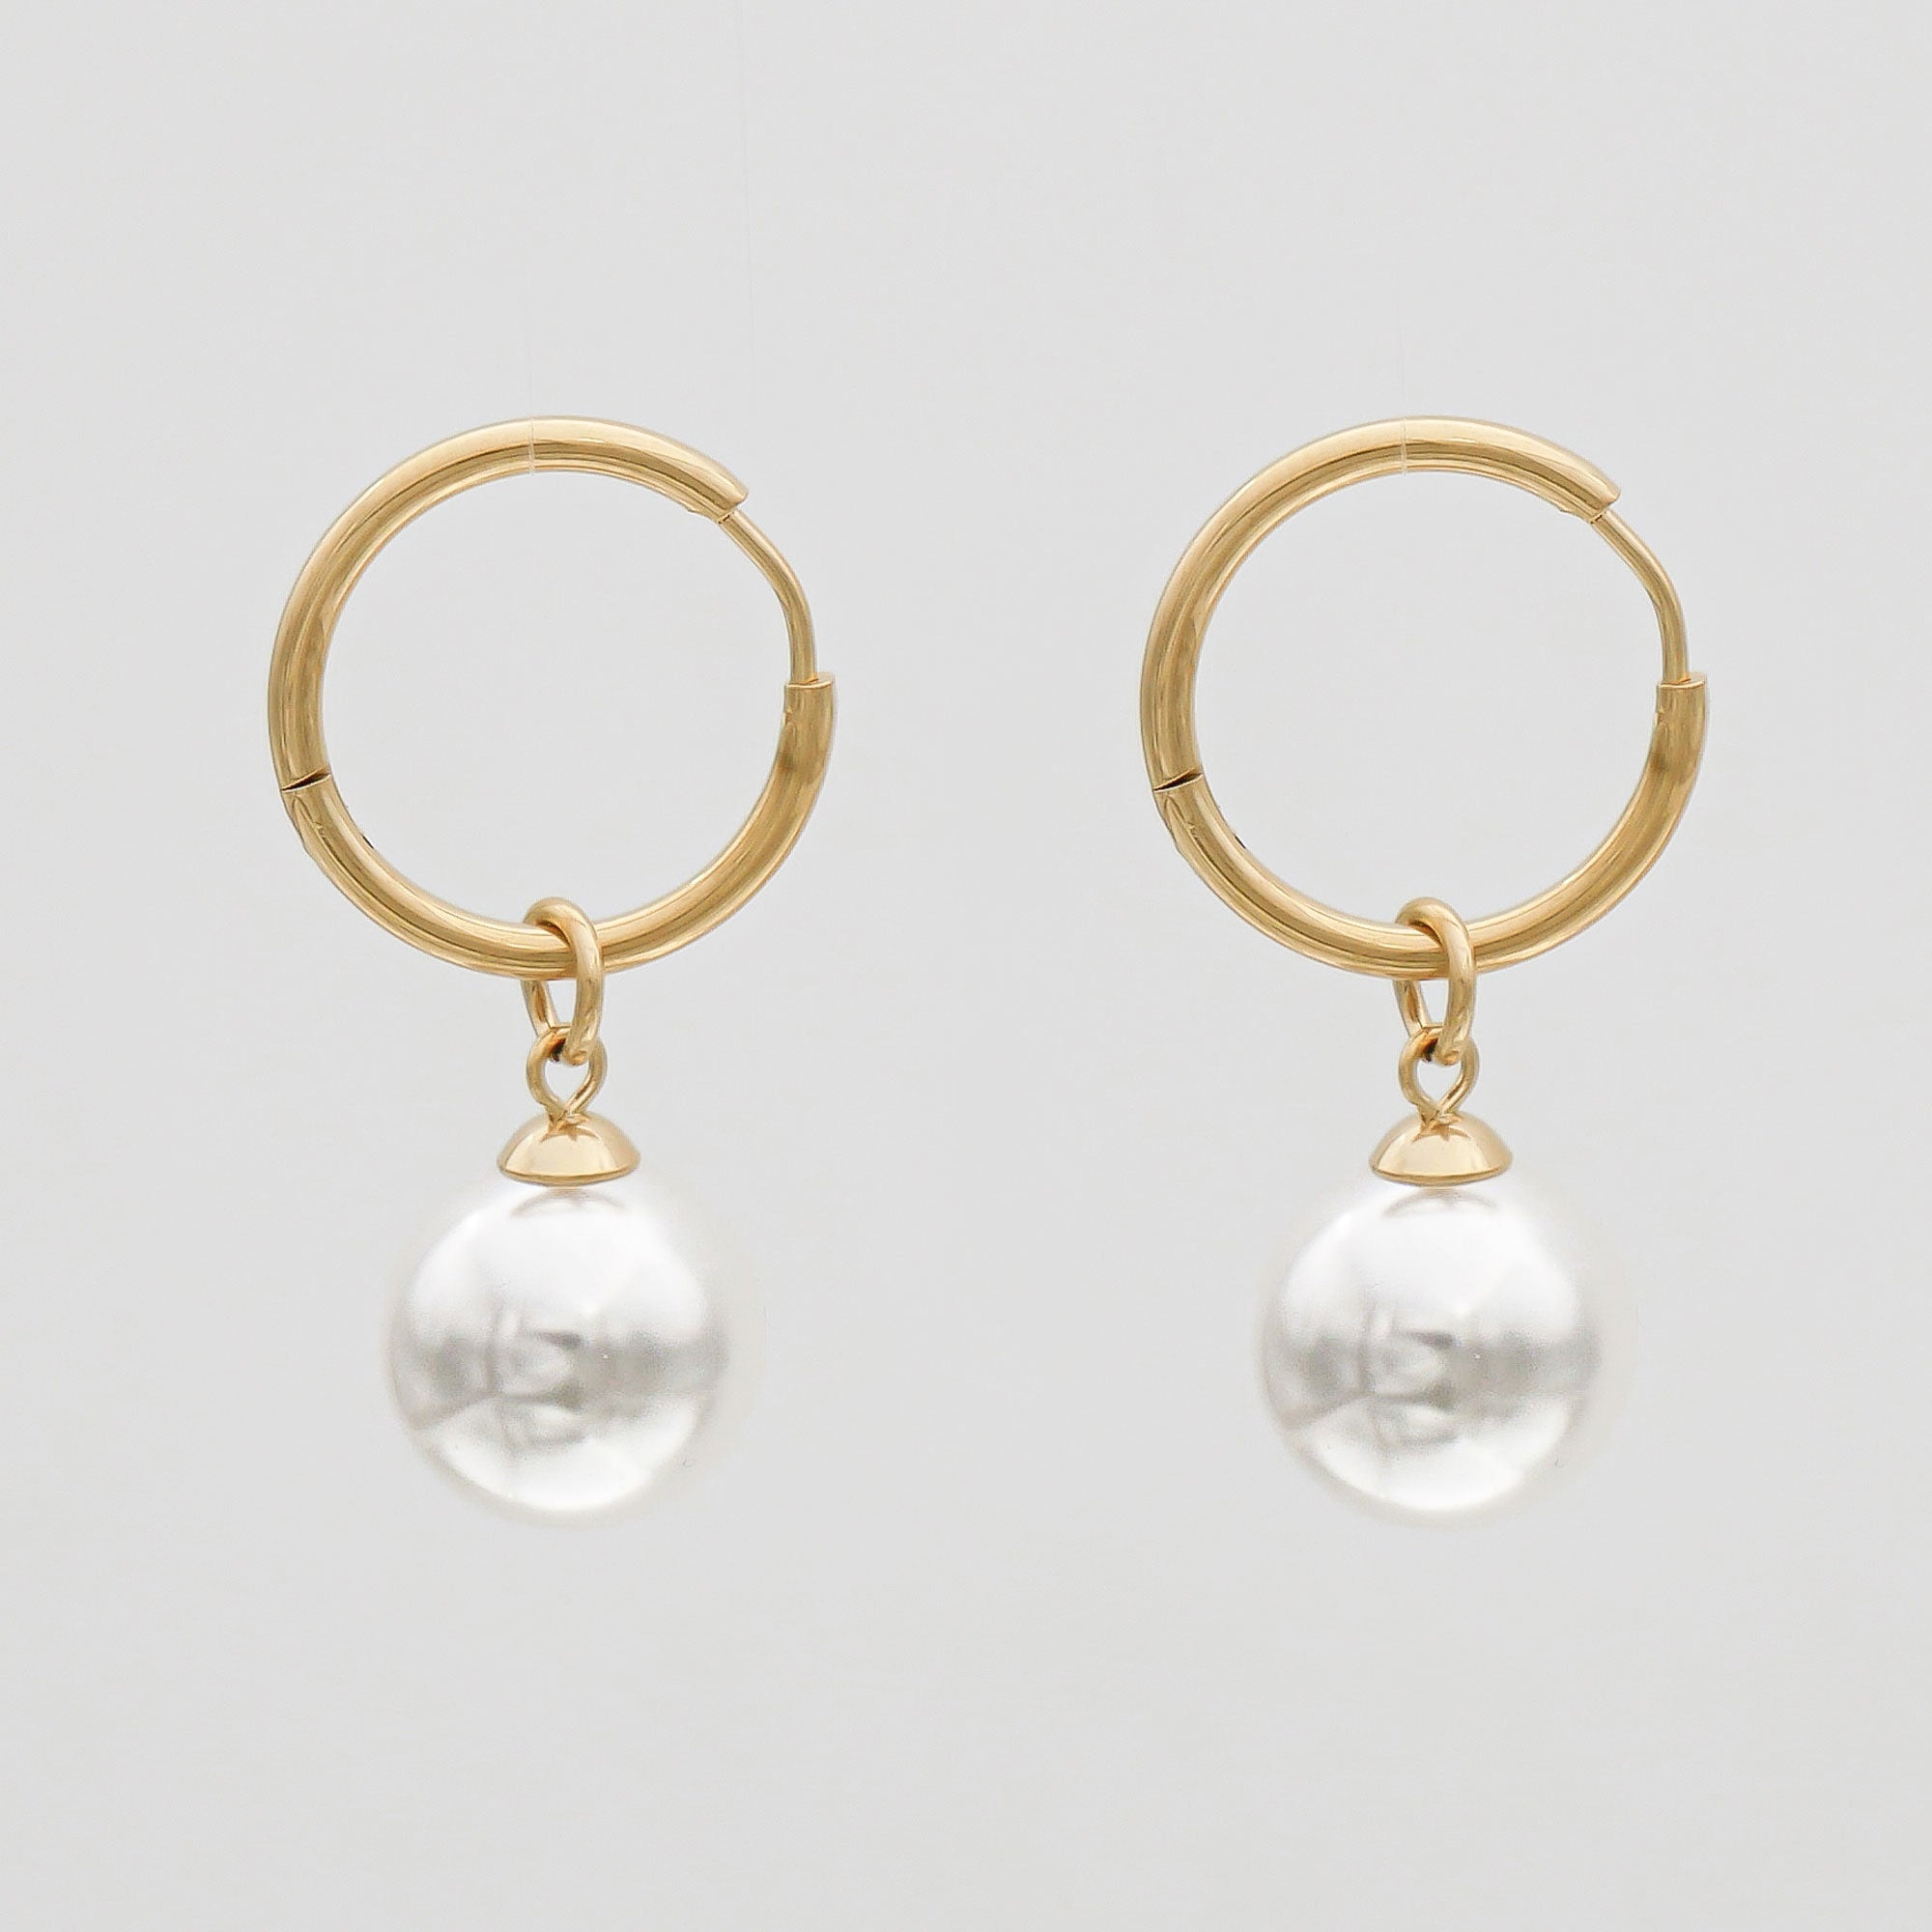 Thin Gold Hoop Phoebe Earrings with White Pearl drop Charms 